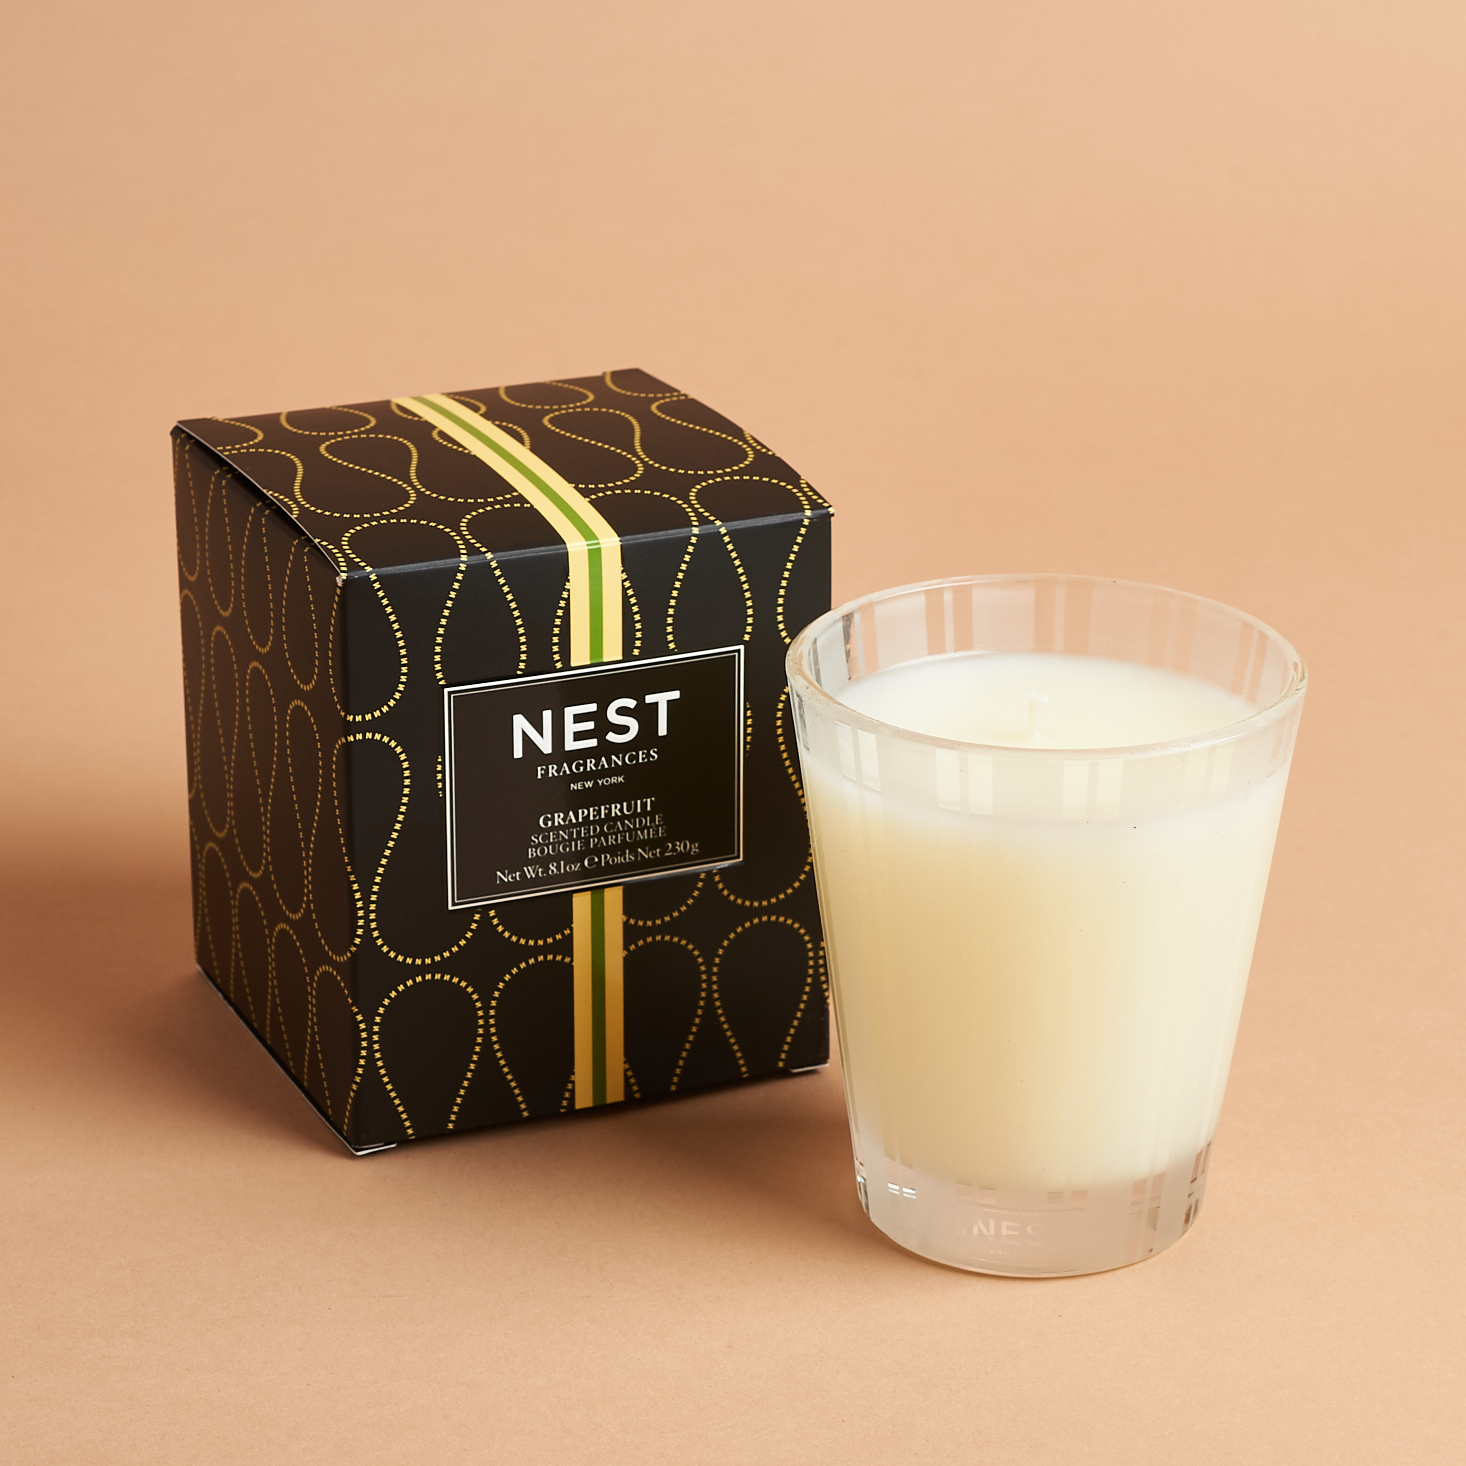 Candle from Nest.